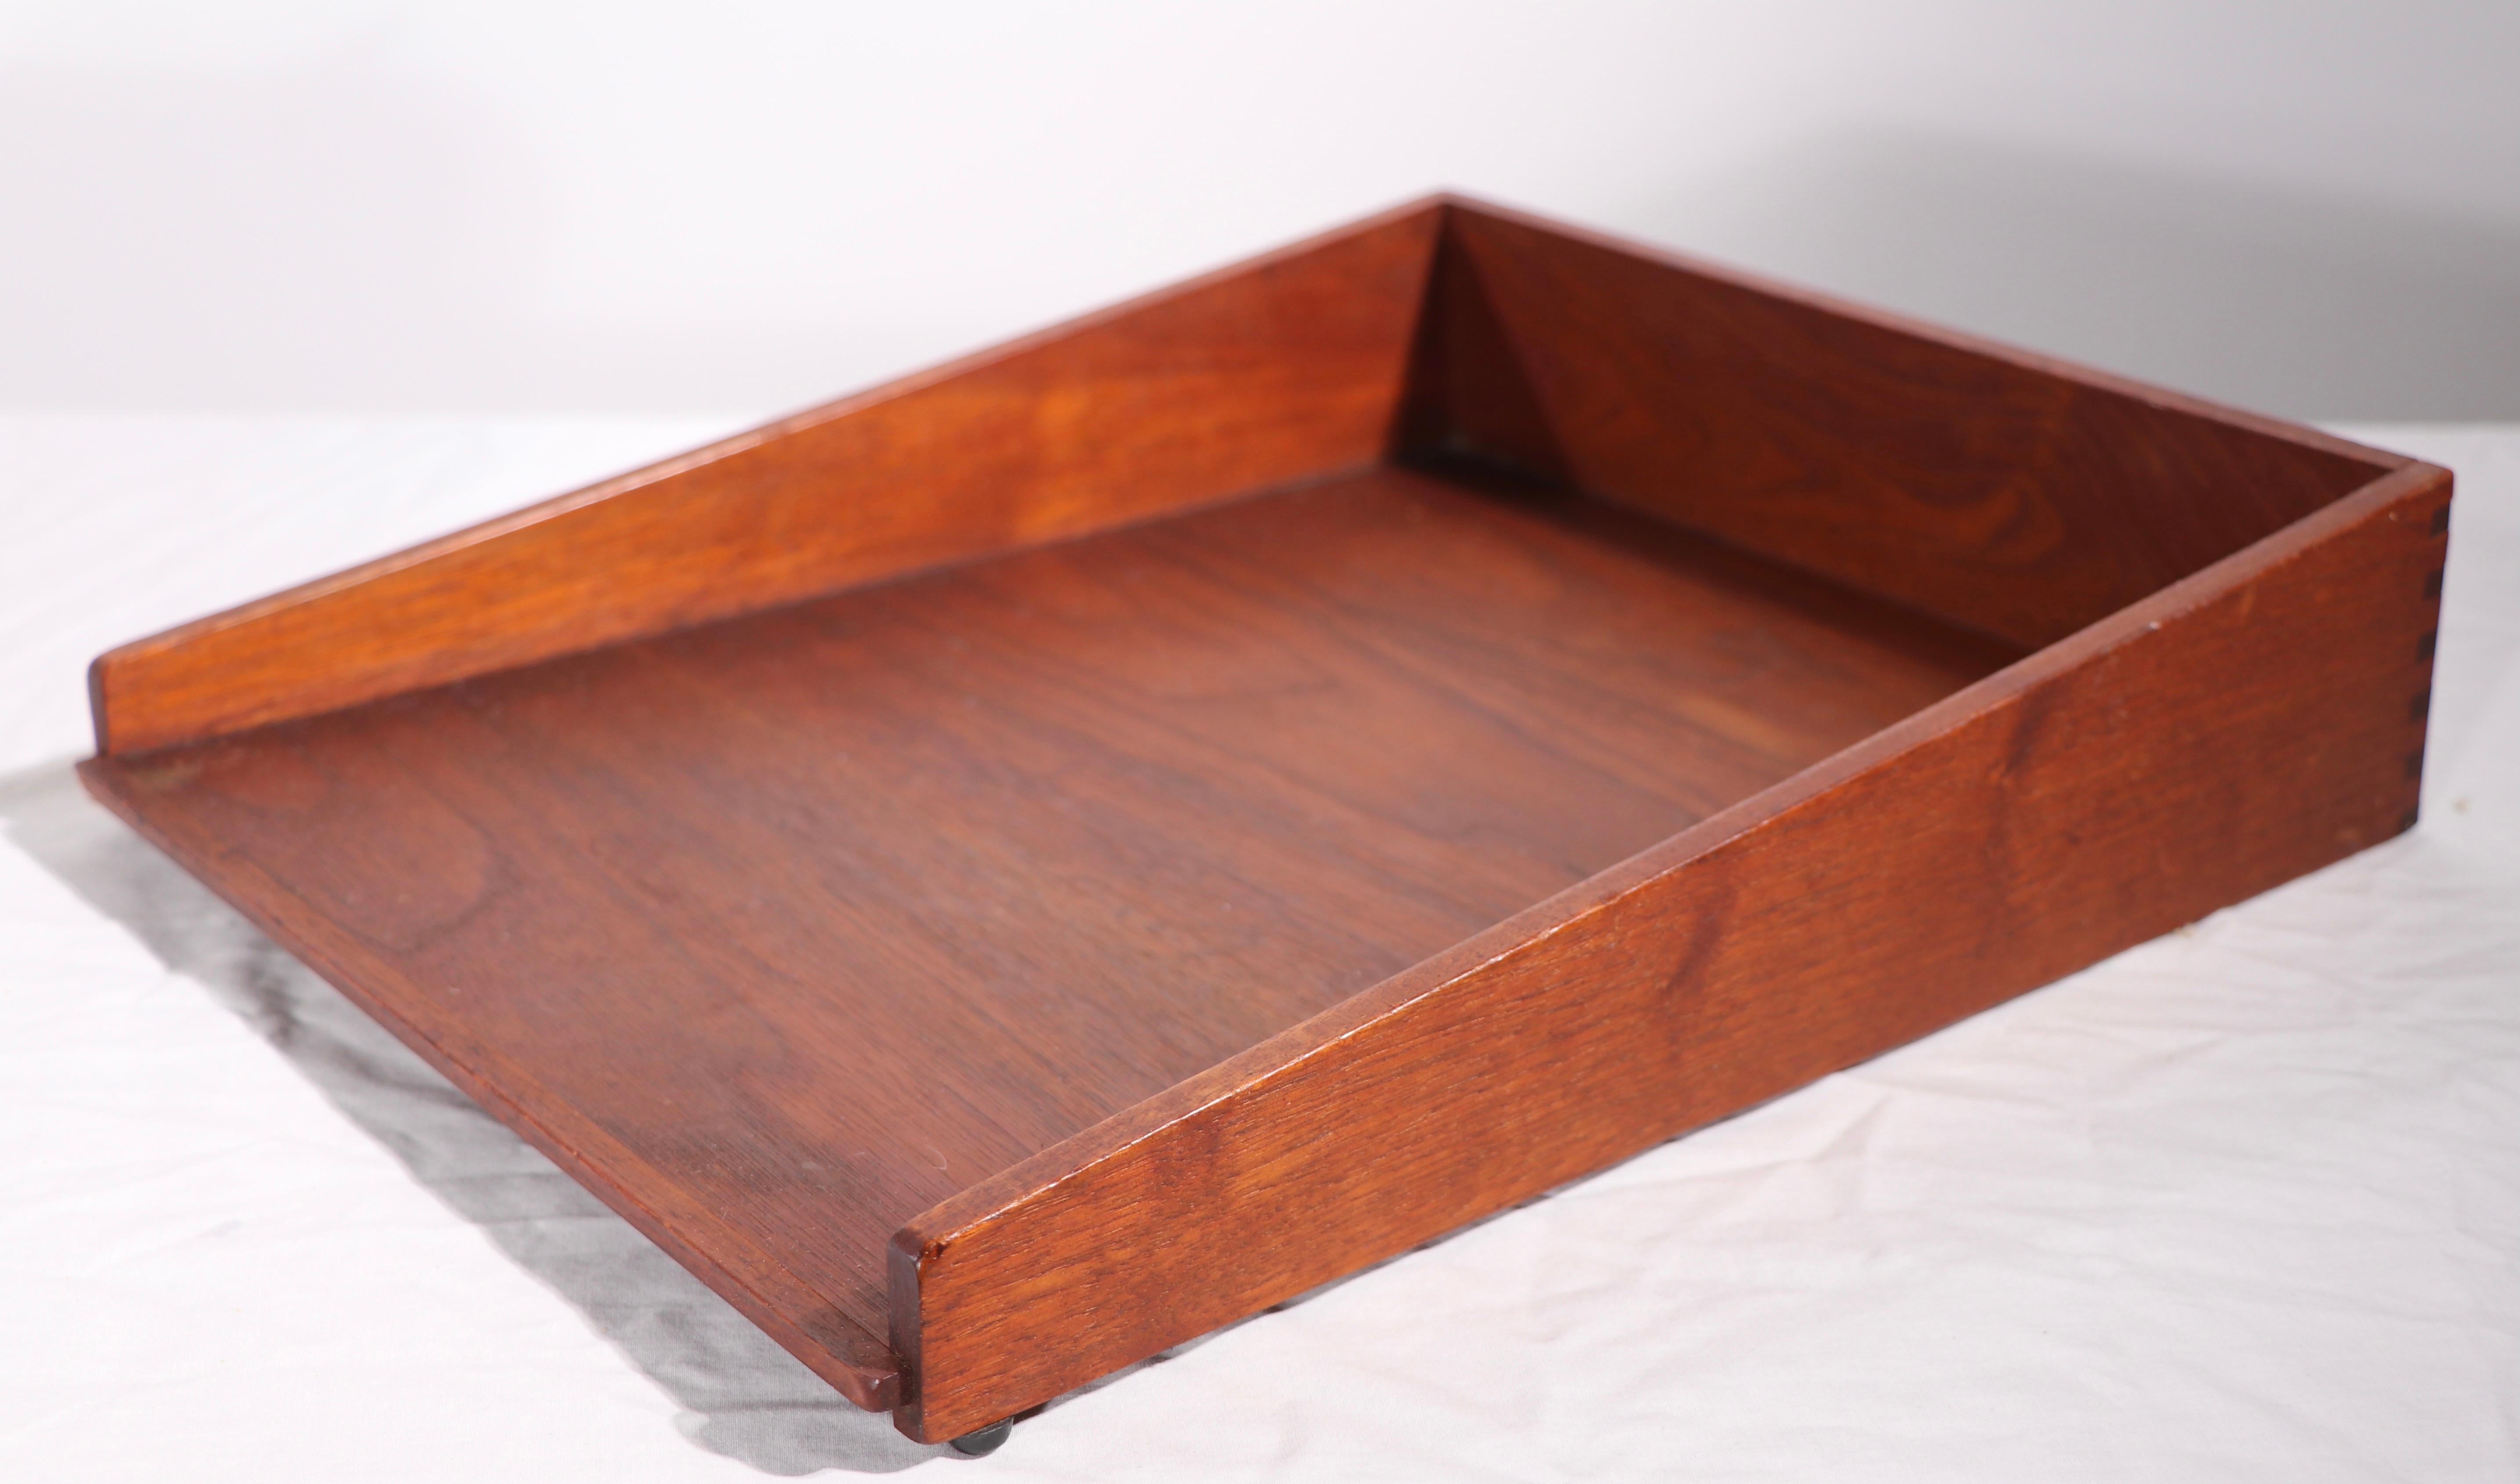 Chic architectural letter tray in walnut, by Jens Risom. This example is in very fine, original condition, clean and ready to use.